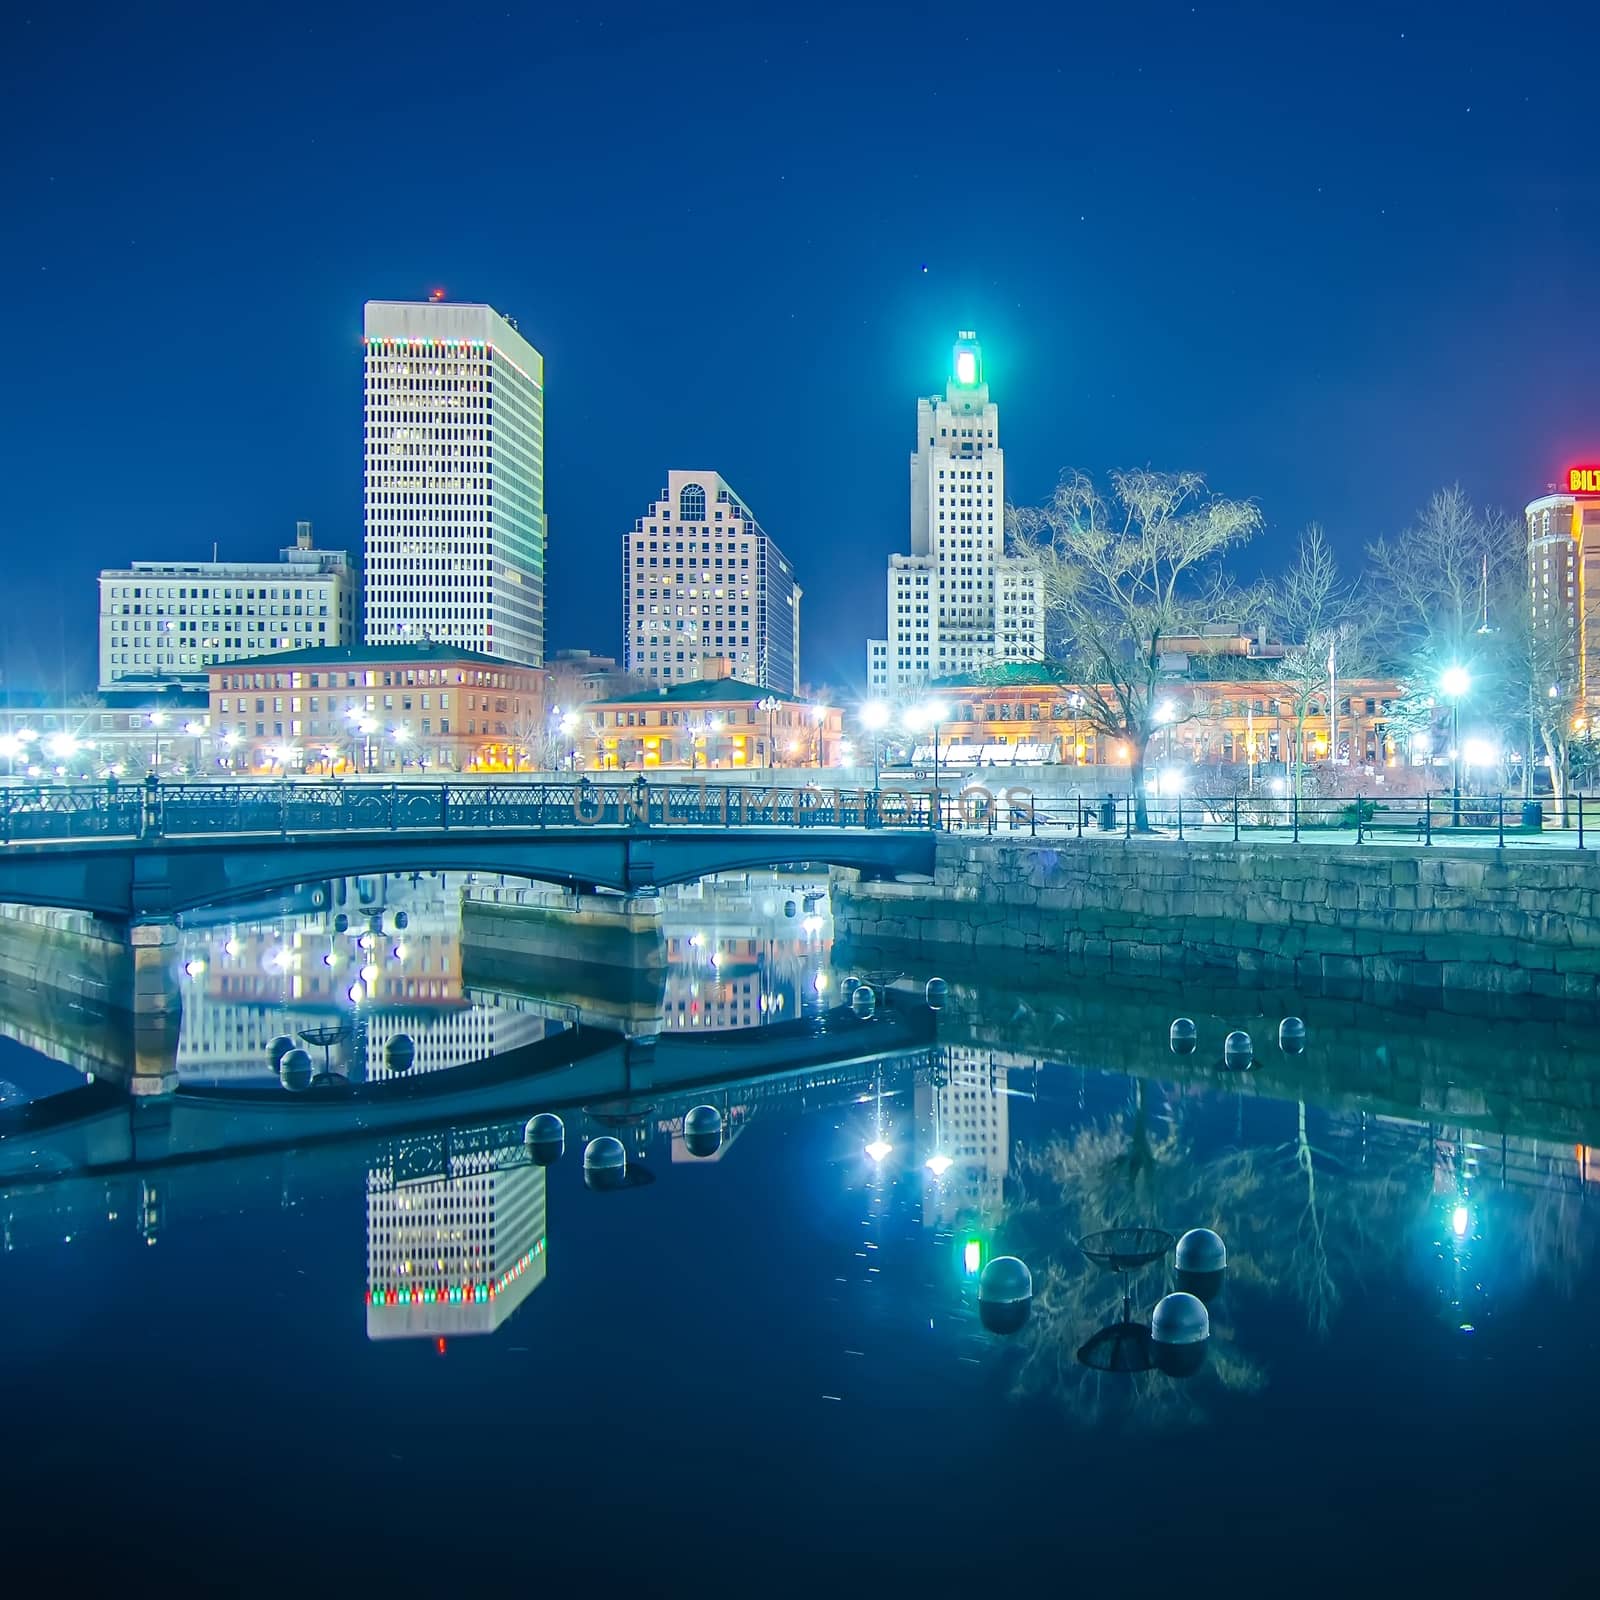 providence Rhode Island from the far side of the waterfront by digidreamgrafix